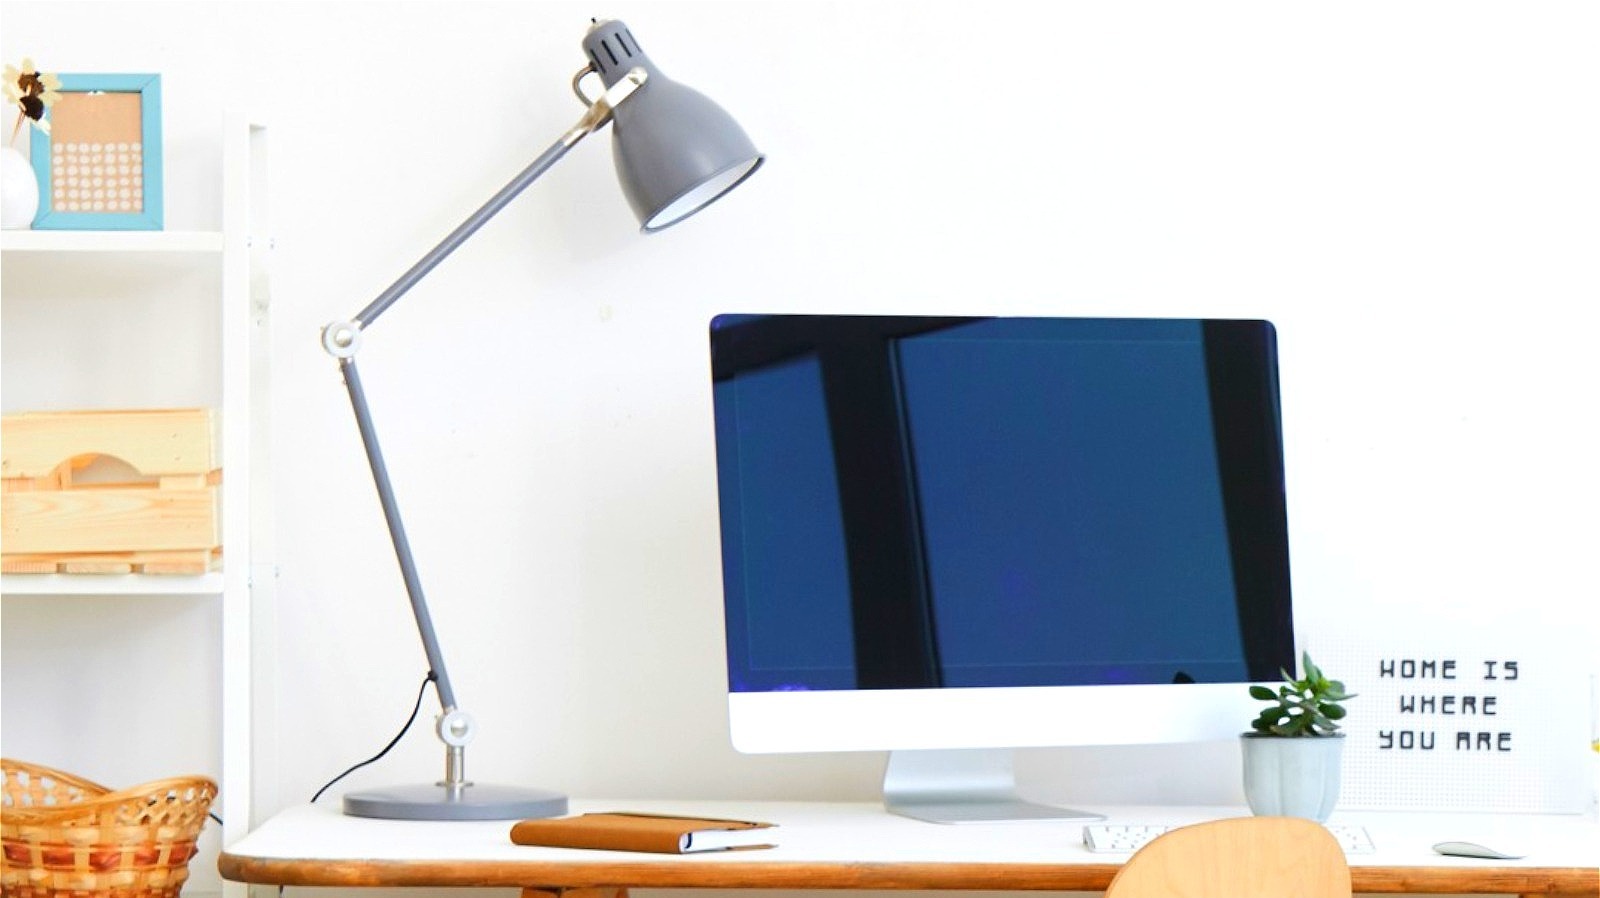 Target Or Ikea: Which Has Better Deals On Desk Lamps?